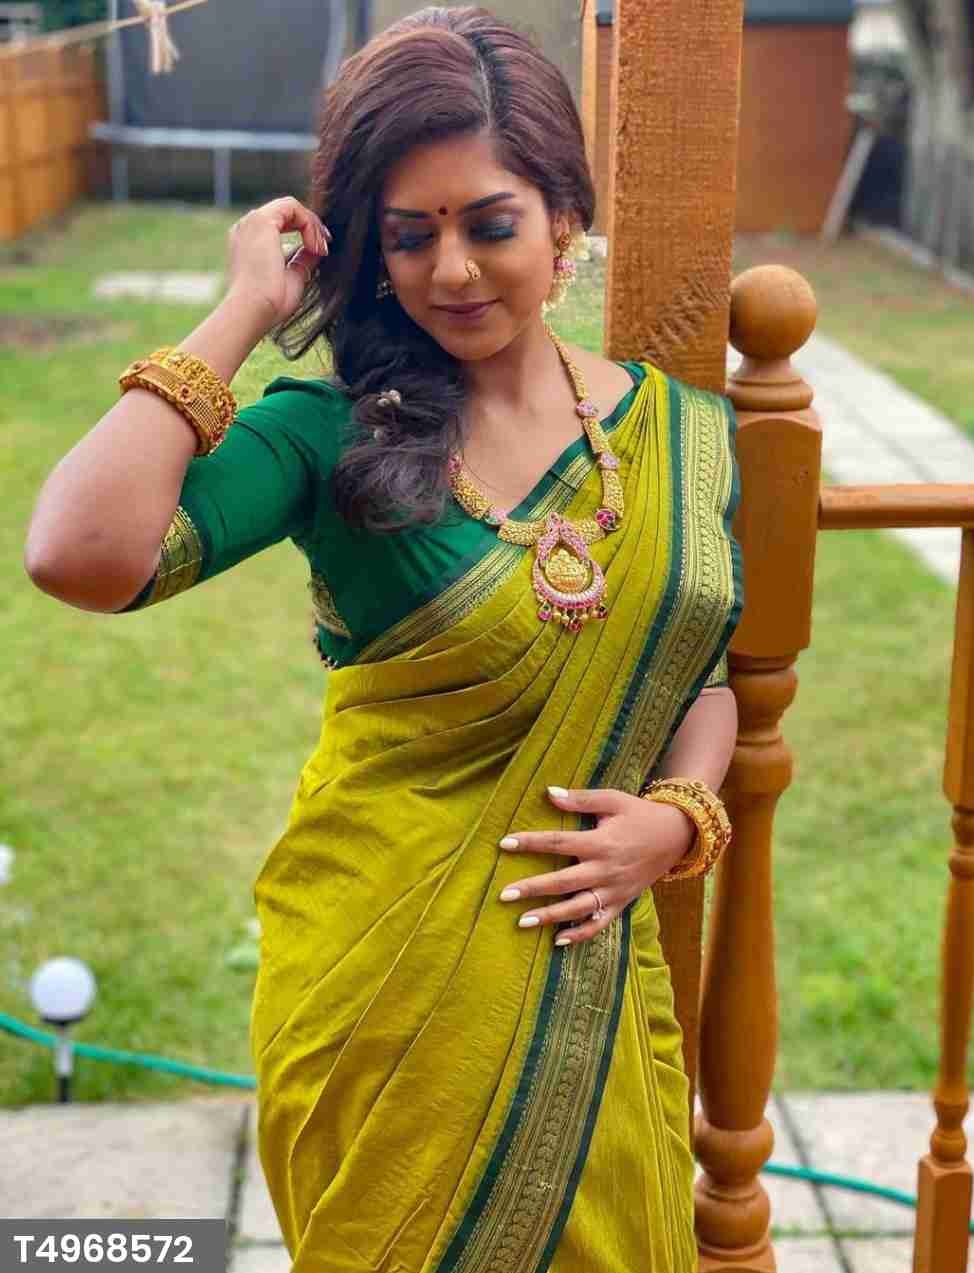 Traditional Kanchipuram Perot Green Color Saree With Lovely Weaving Green Border And Pallu Weaving At Its Finest And Most Classic